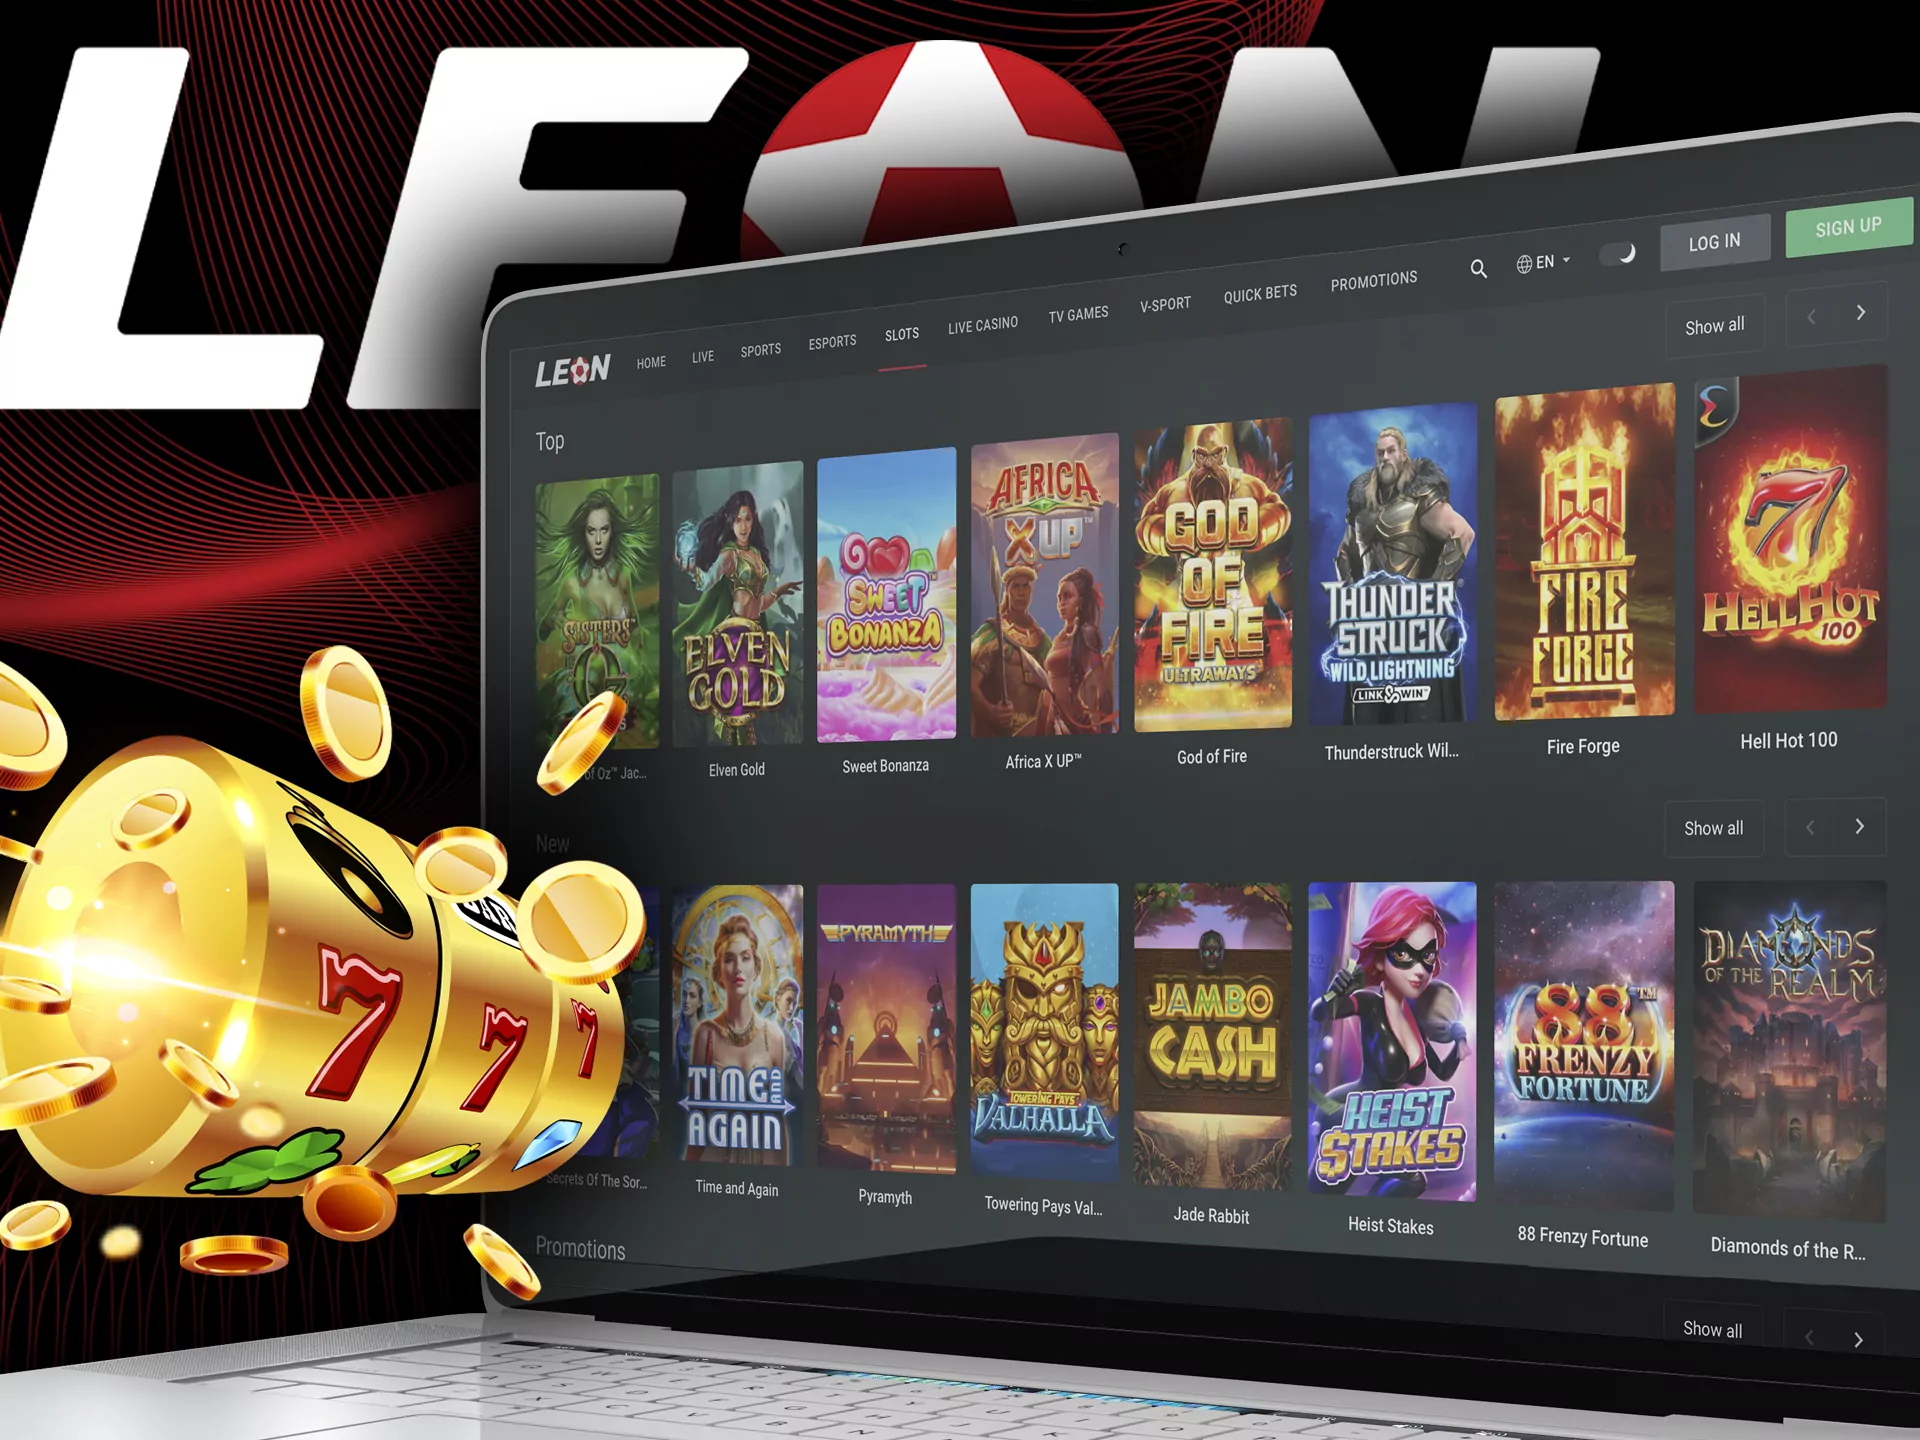 Play your favorite slot games in the Leon online casino.